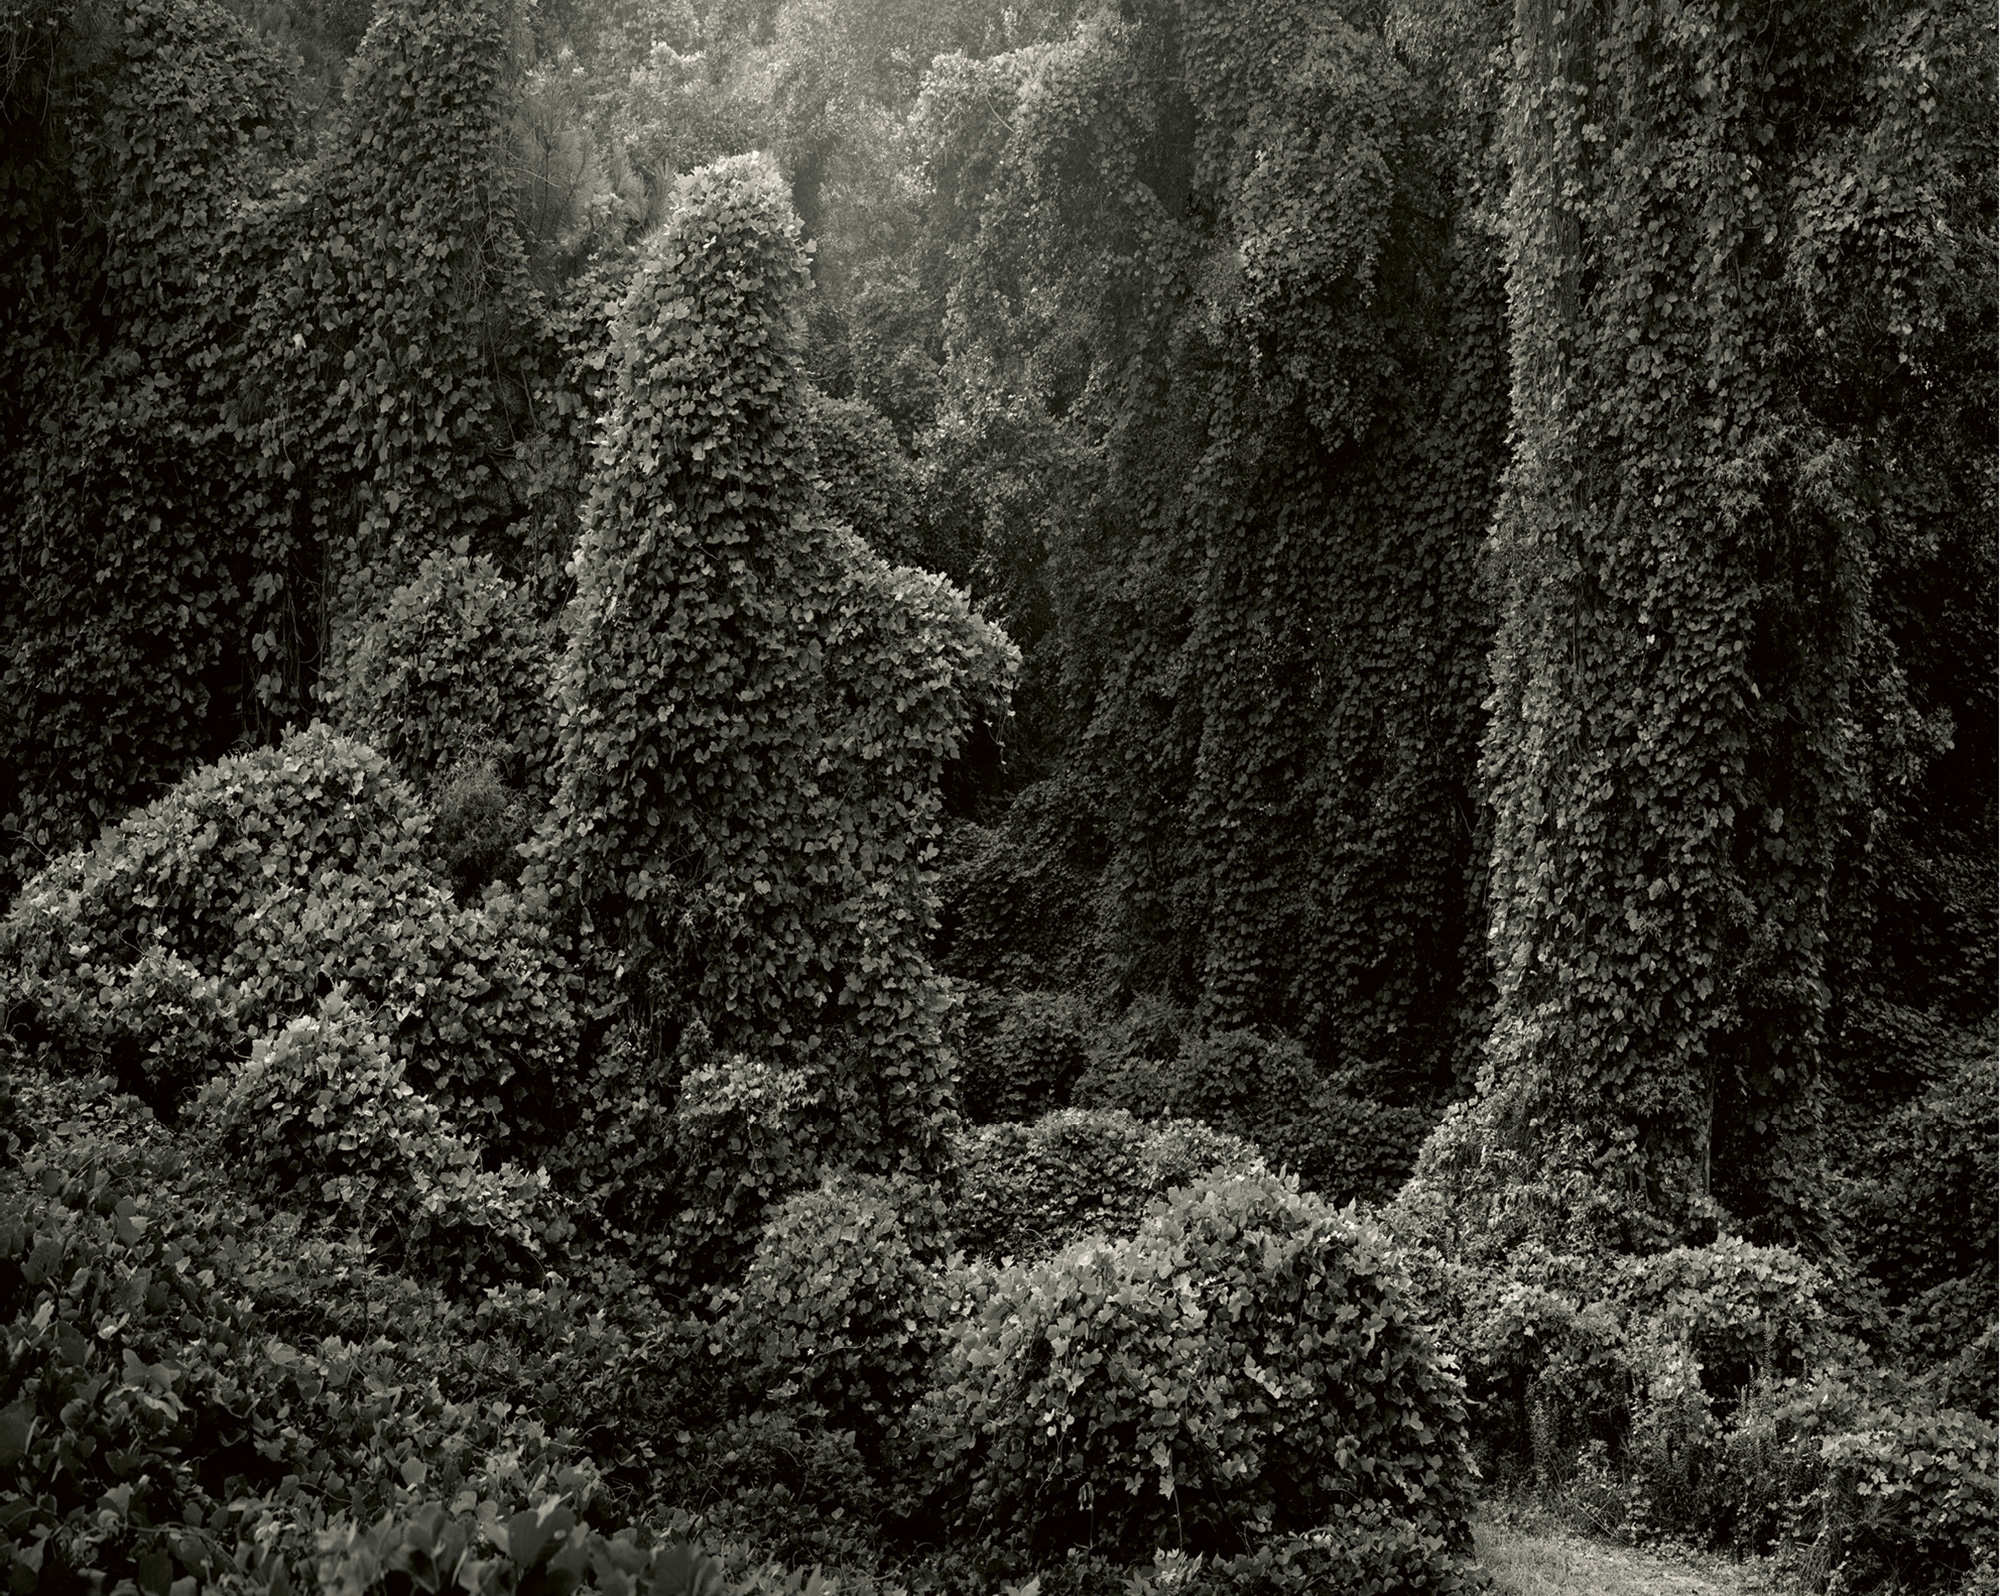 Helene Schmitz’s two thousand and twelve photograph depicting landscapes of the southeastern United States covered in kudzu.